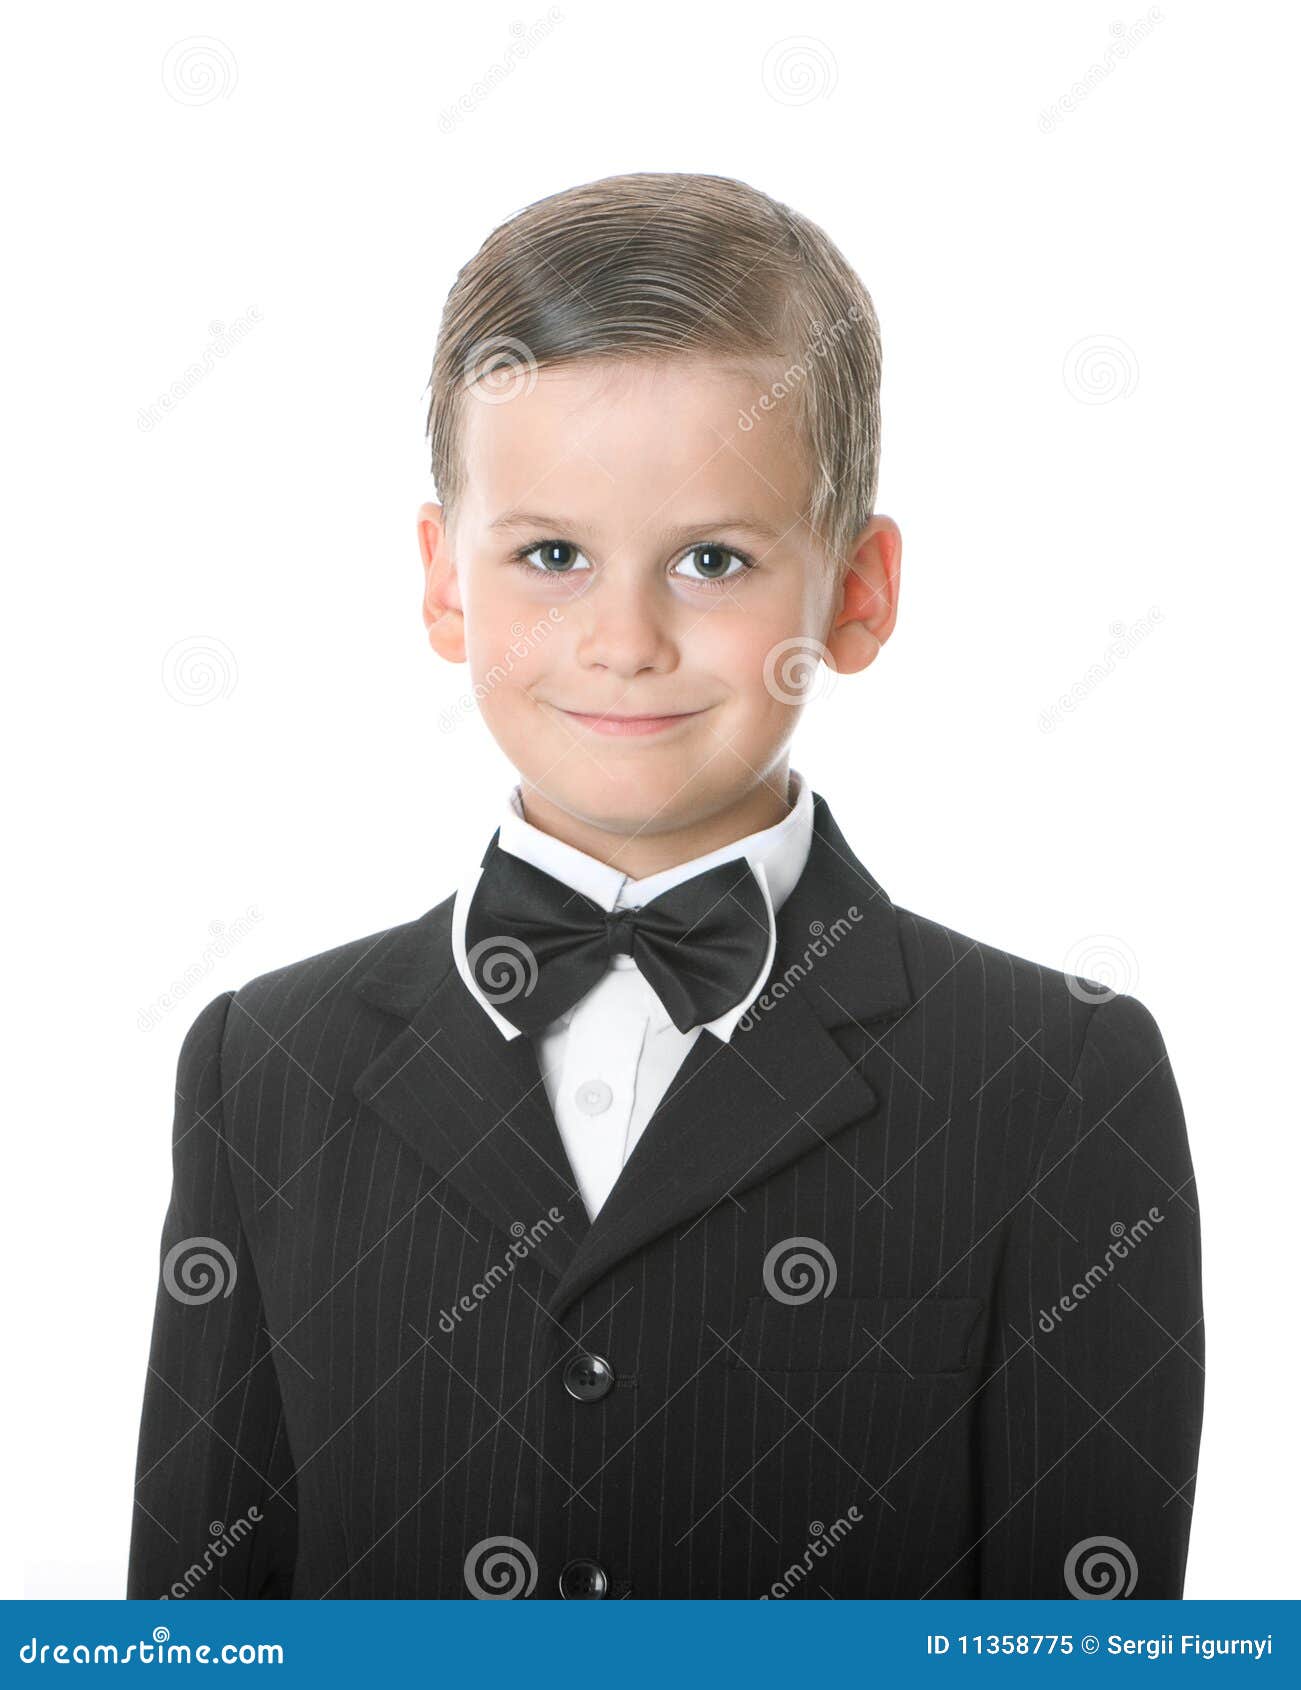 Boy in a suit smiles stock image. Image of looking, caucasian - 11358775